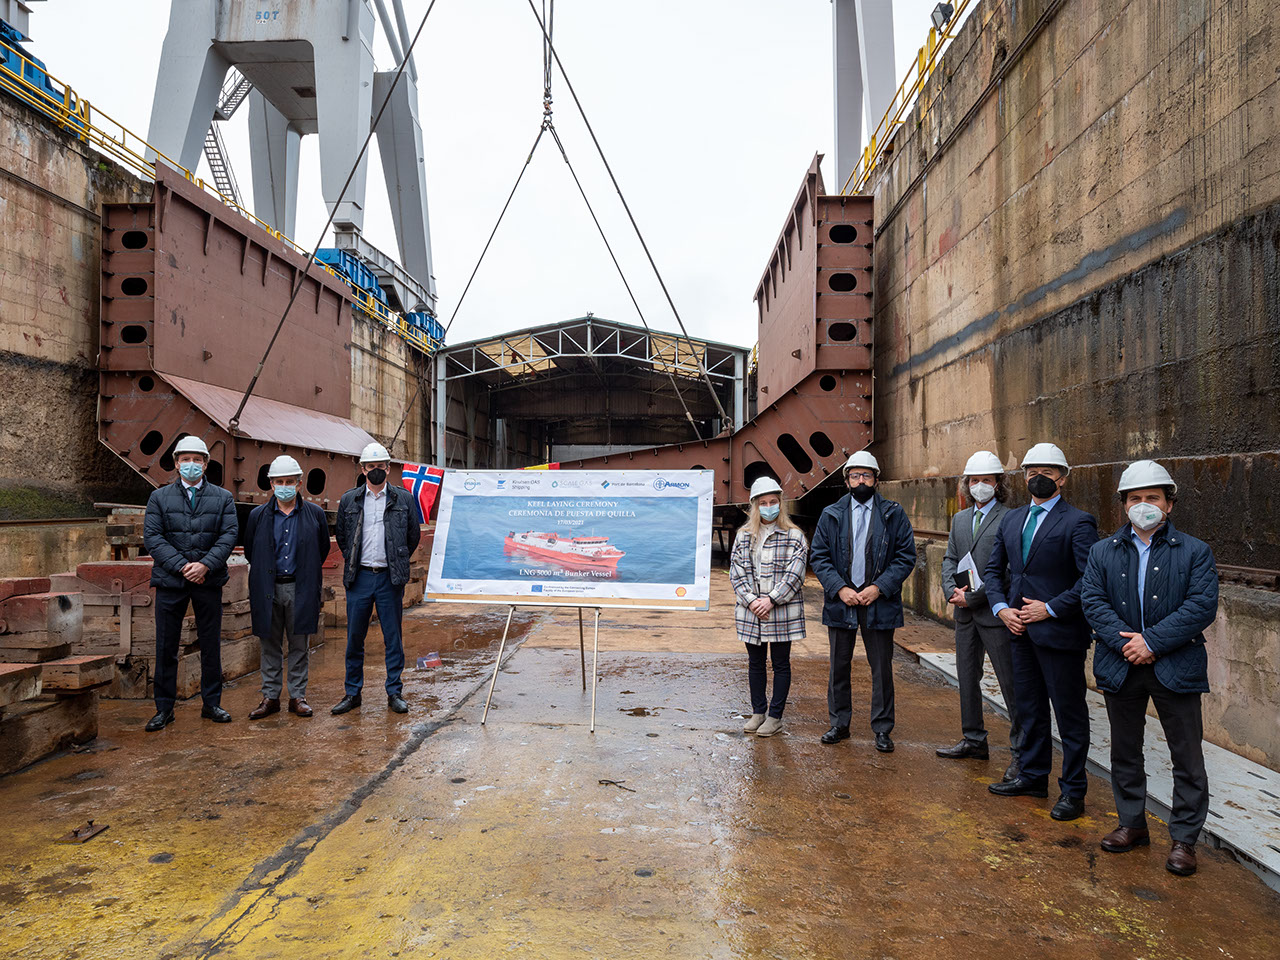  Keel-laying ceremony for the LNG bunkering vessel in Gijón